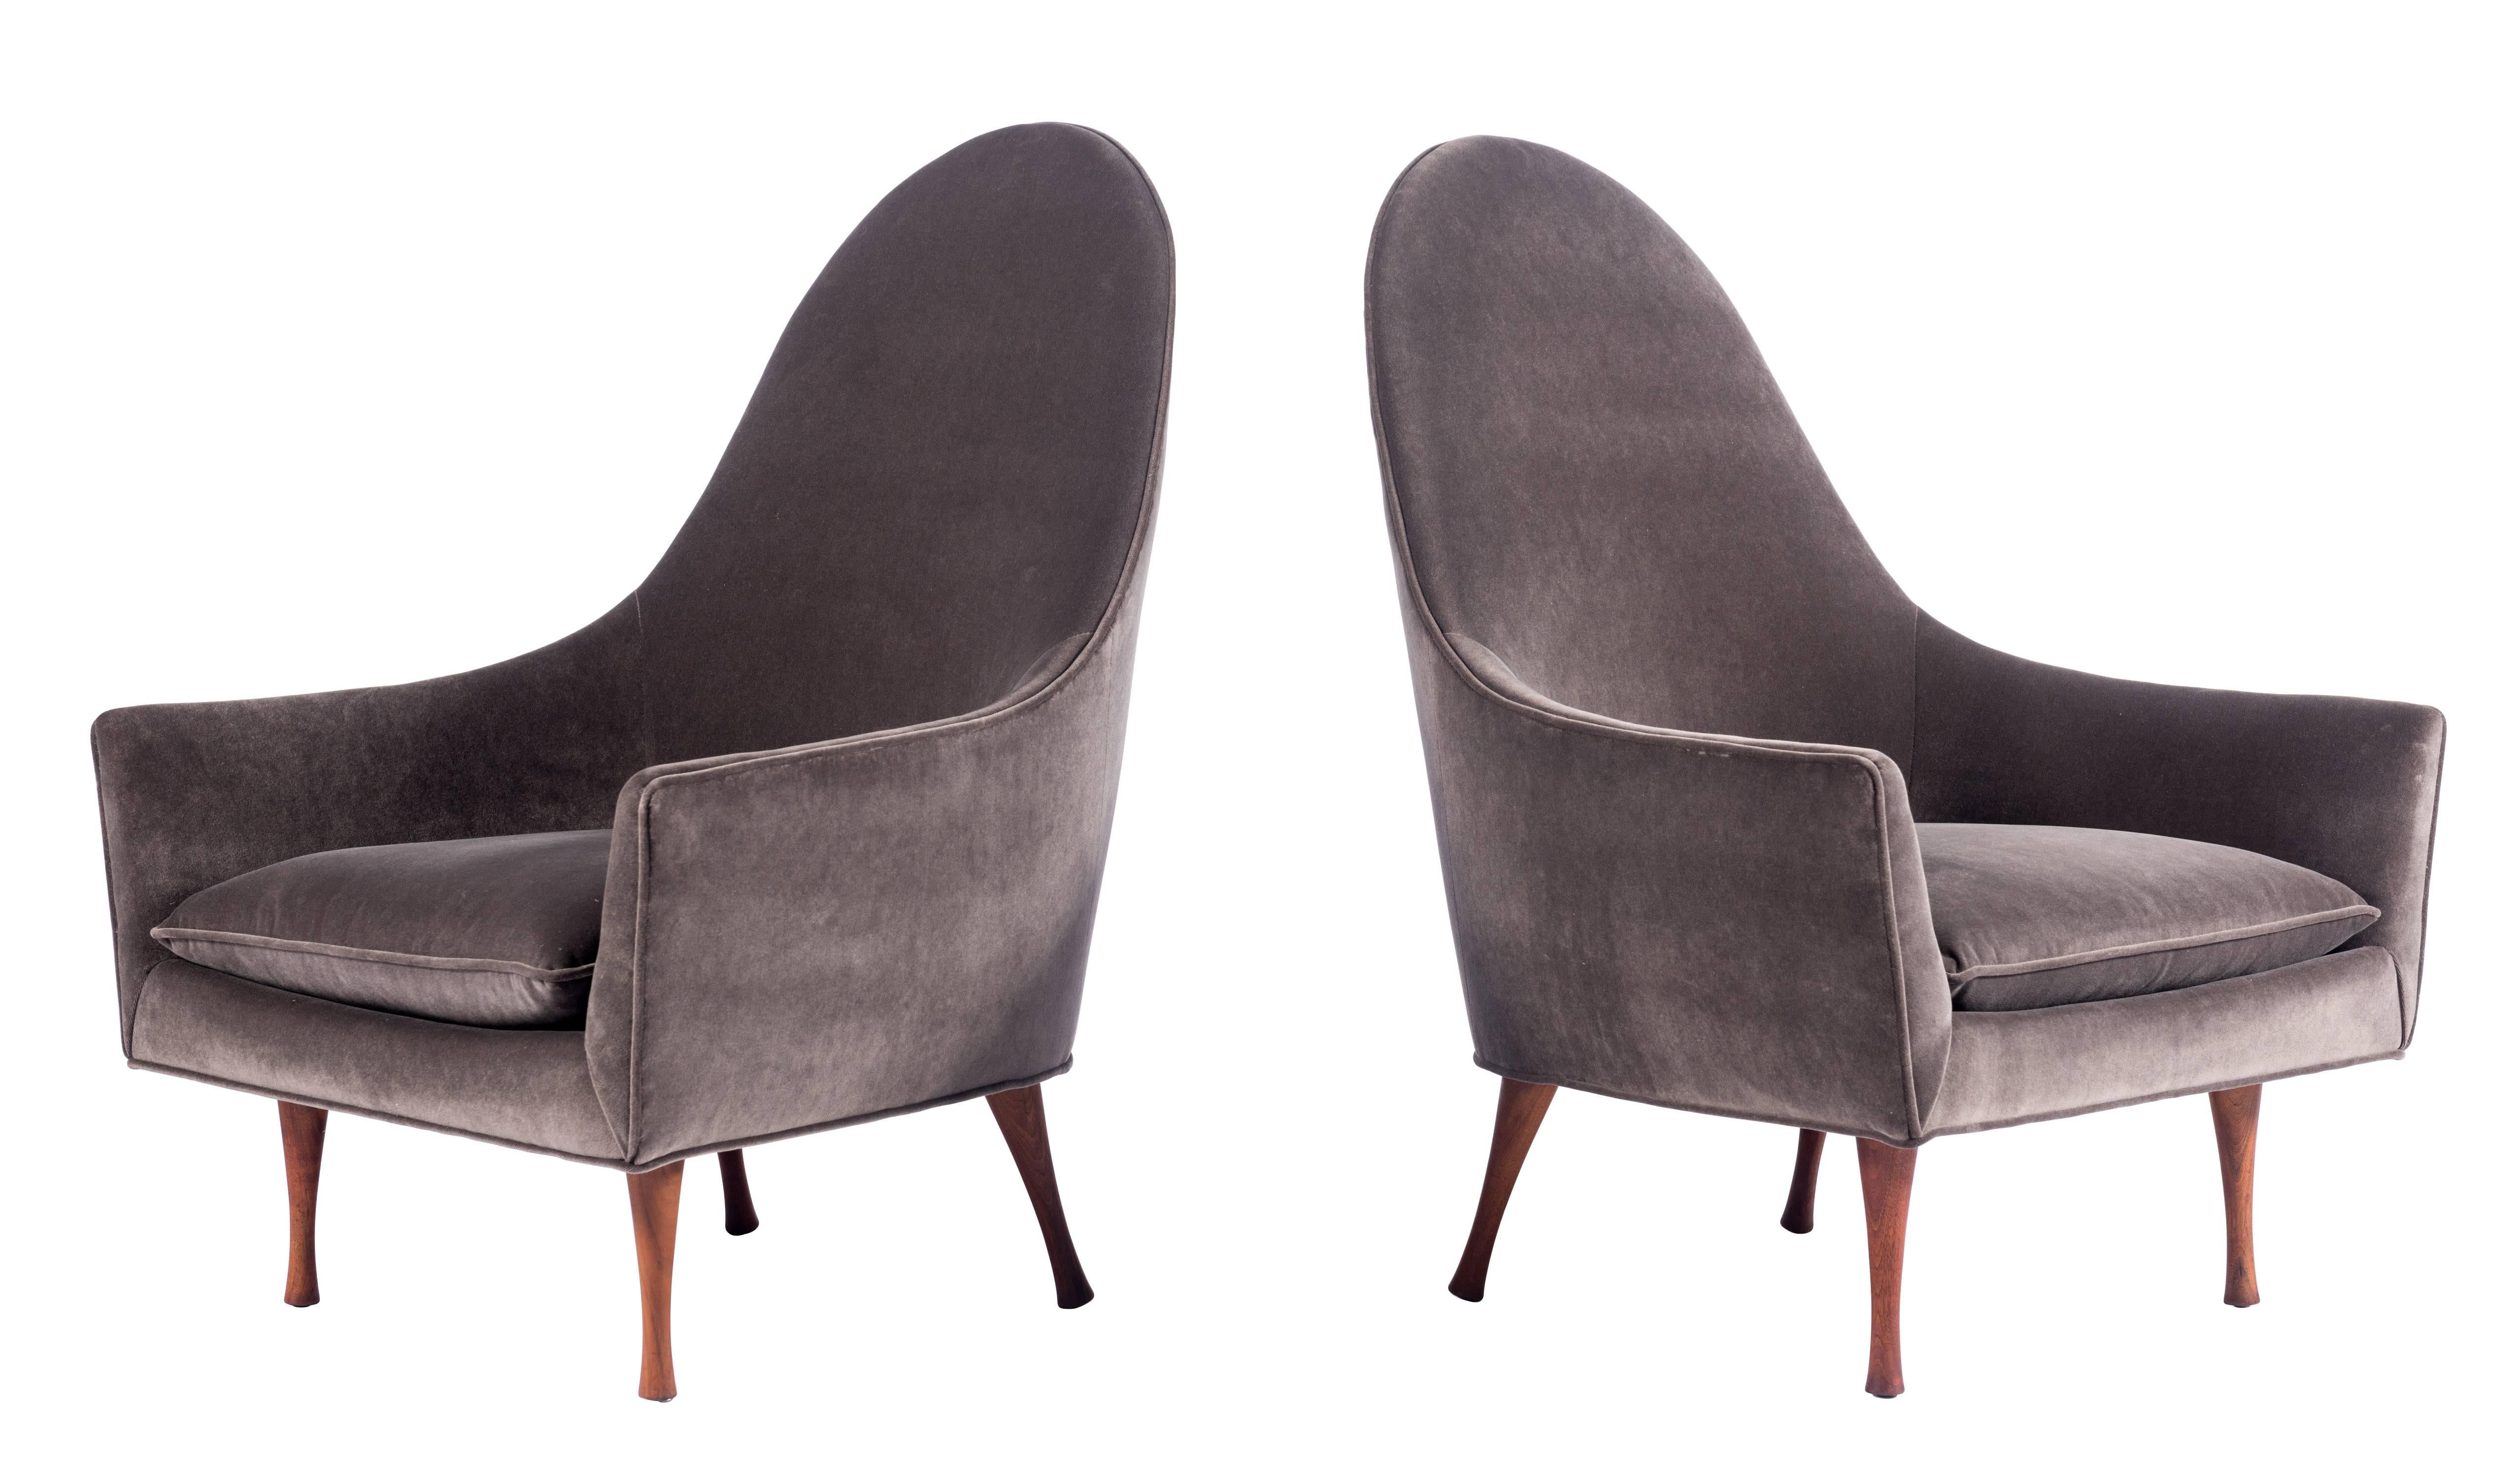 Pair of rare high-back lounges from McCobb’s short-lived "Symmetric" furniture group line for Widdicomb in 1961. Newly re-upholstered and refinished.